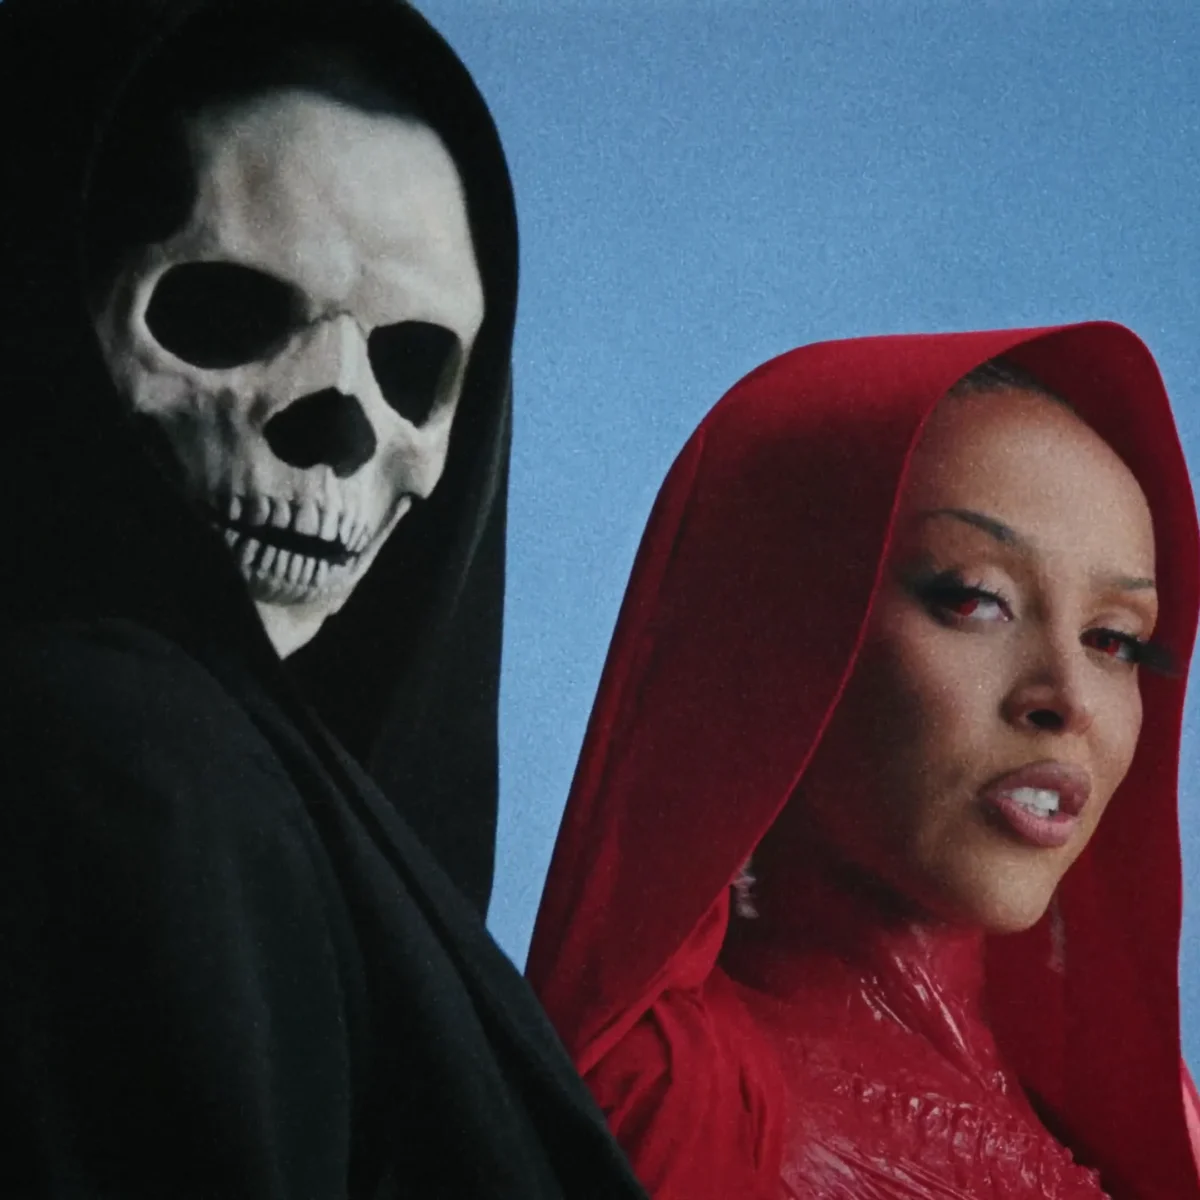 Meaning of Skull and Bones by Doja Cat